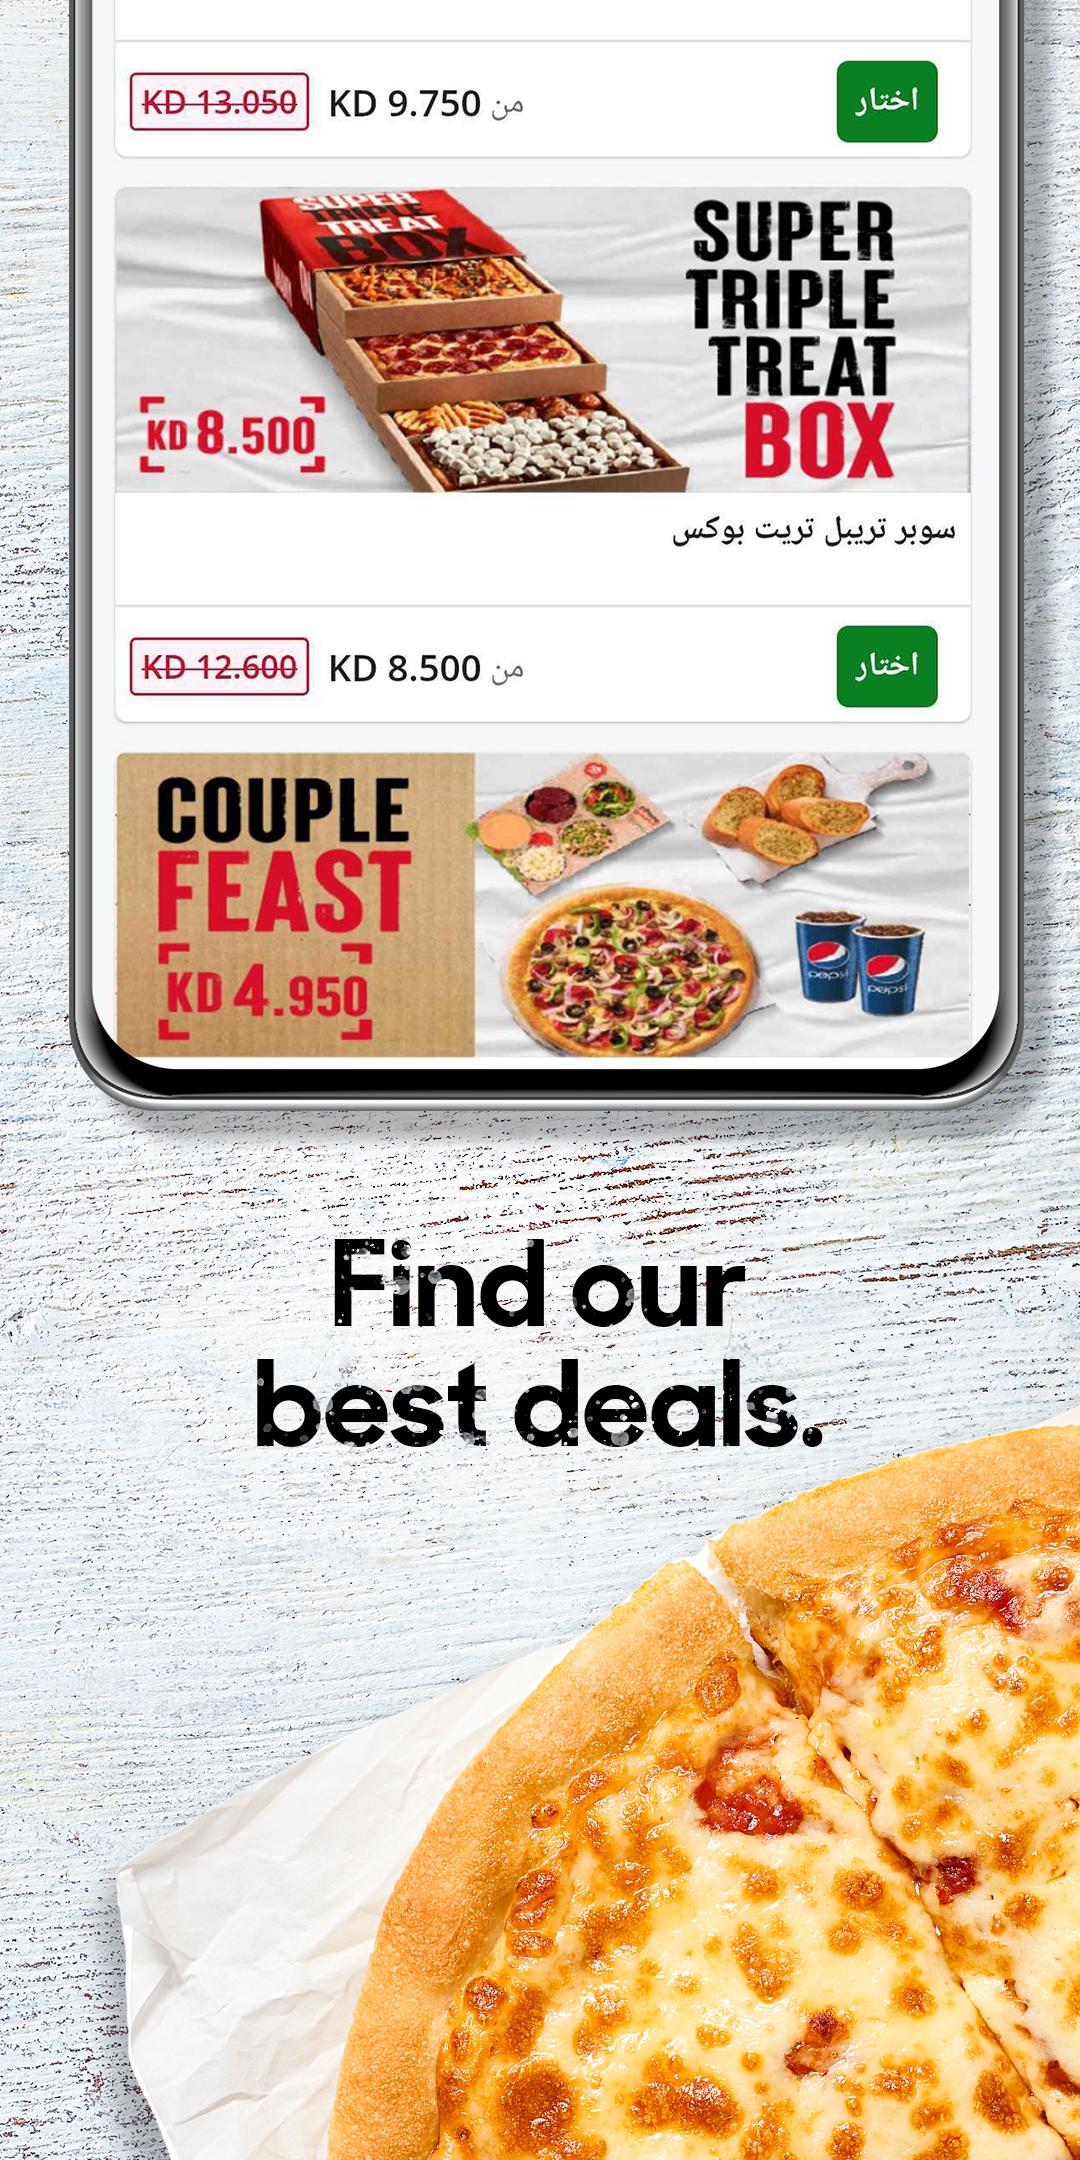 Download Pizza Hut Kwt - Order Food Now Android On Pc